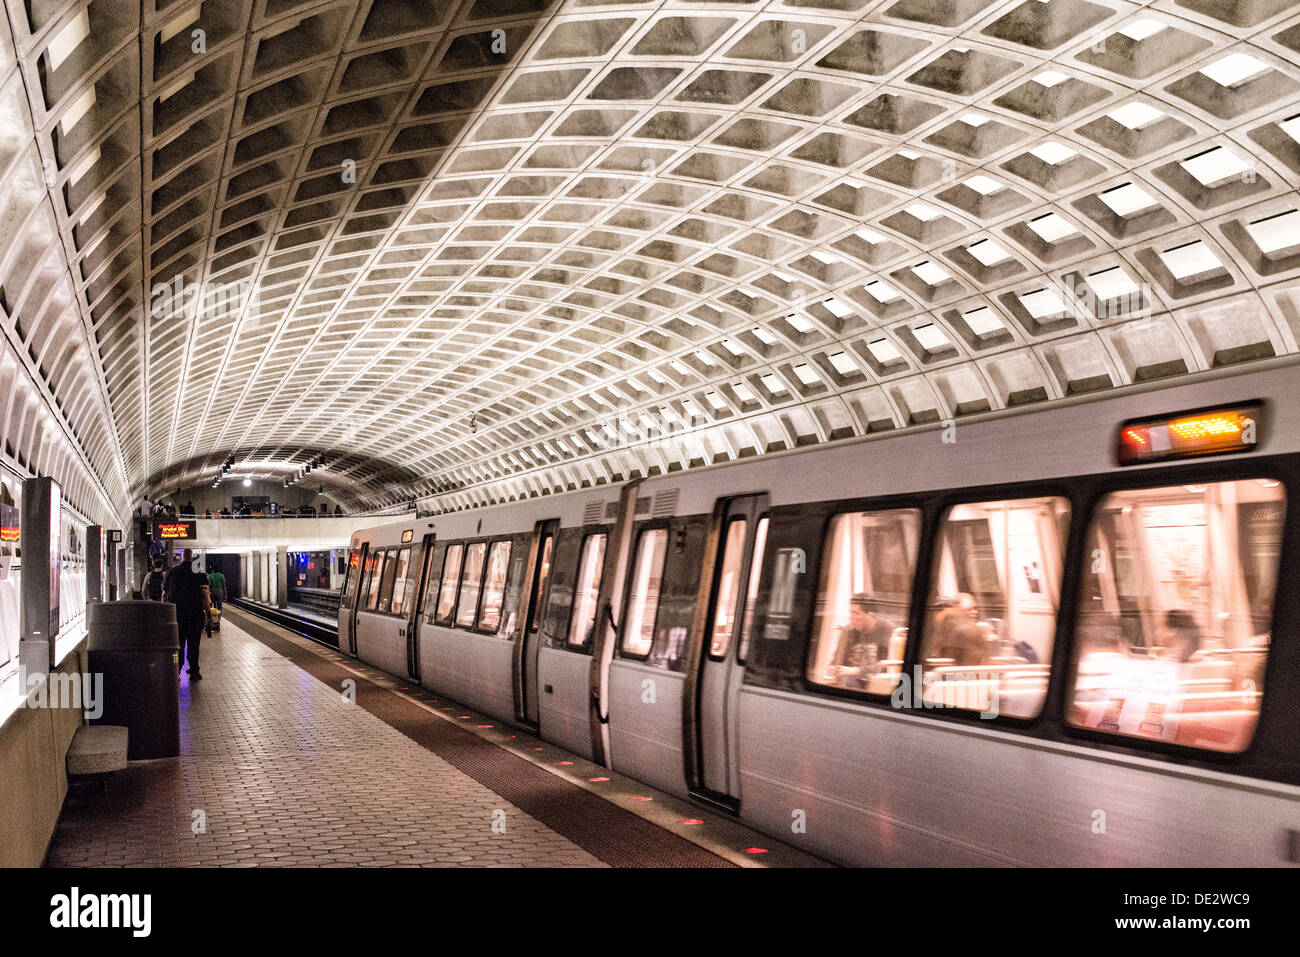 A train leaves the platform at one of the distinctive domed stations of the Washington Metropolitan Area Transit Authority subway system in the Washington DC area. This station is in Ballston, Arlington, a few stops out from downtown Washington DC. Stock Photo